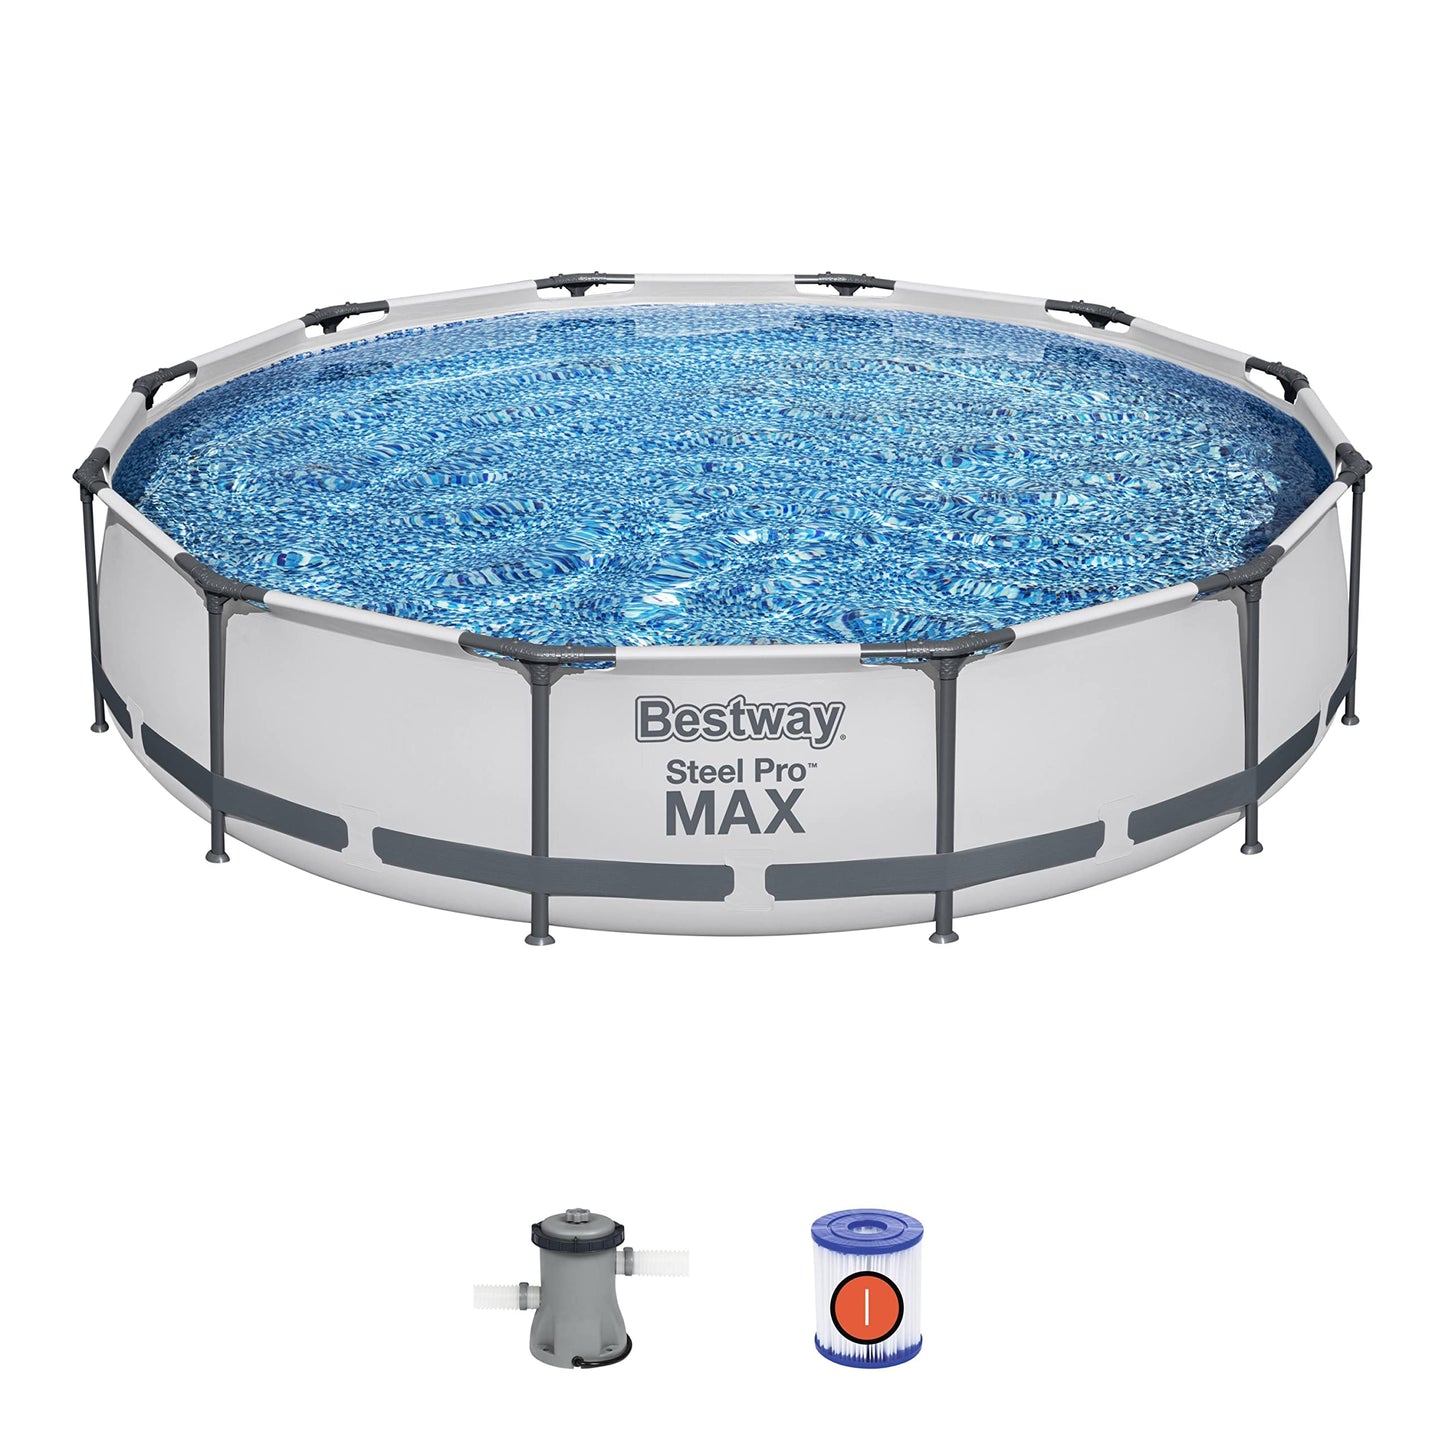 Bestway Steel Pro MAX 12 Foot x 30 Inch Round Metal Frame Above Ground Outdoor Backyard Swimming Pool Set with 330 GPH Filter Pump 12' x 30"